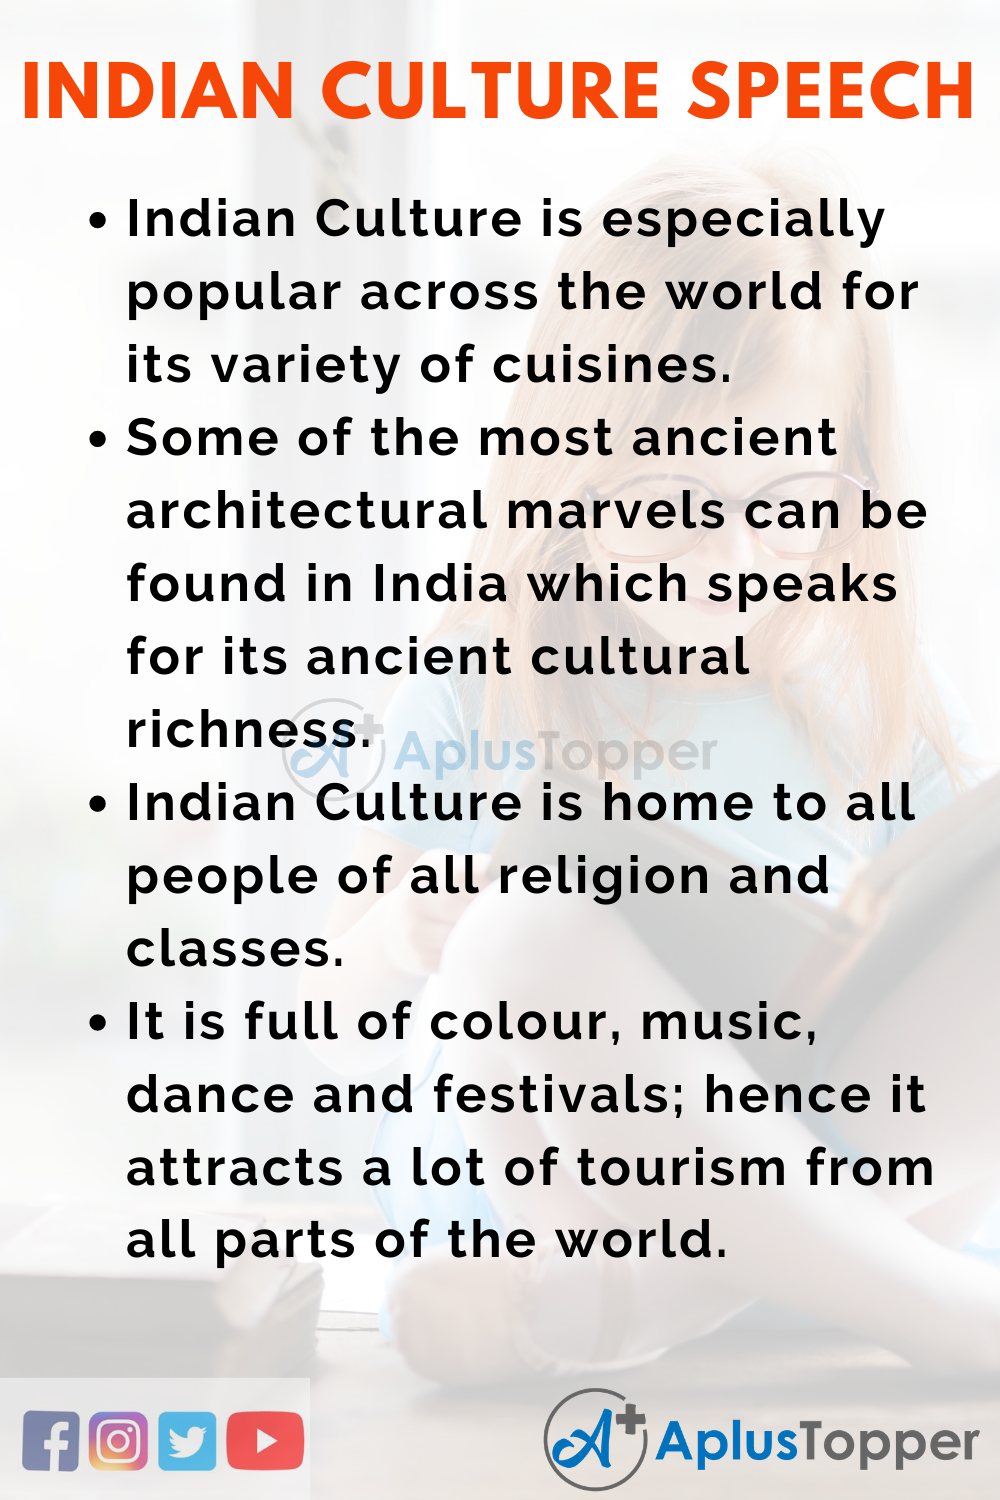 Short Speech On Indian Culture 150 Words In English